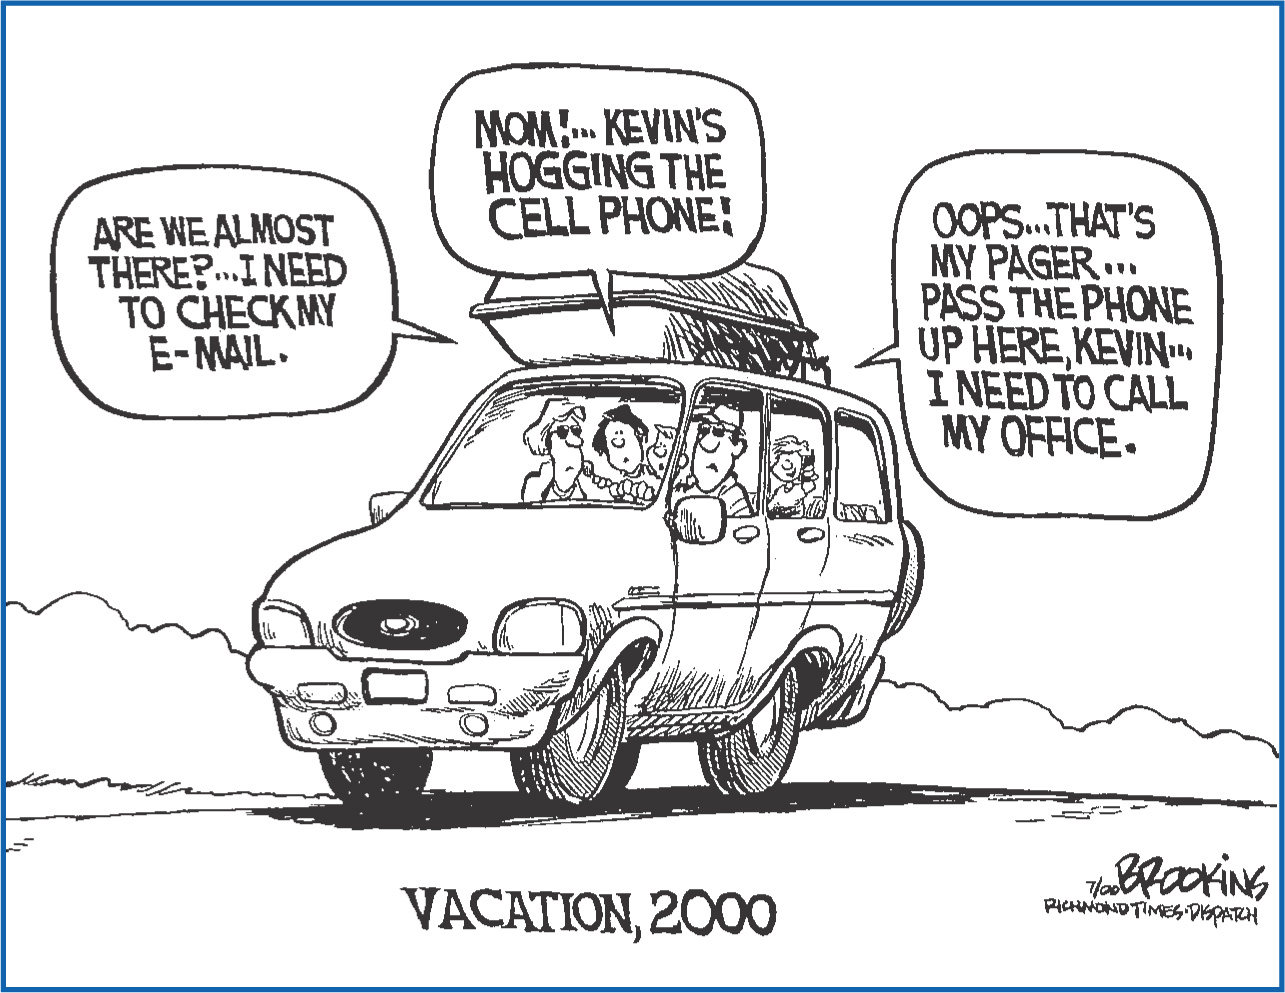 Cartoon: In a car, family members say 'Are we almost there? I need to check my e-mail.' 'Mom! Kevin's hogging the cell phone!' 'Oops, that's my pager. Pass the phone up here Kevin, I need to call my office.' A caption: Vacation, 2000.